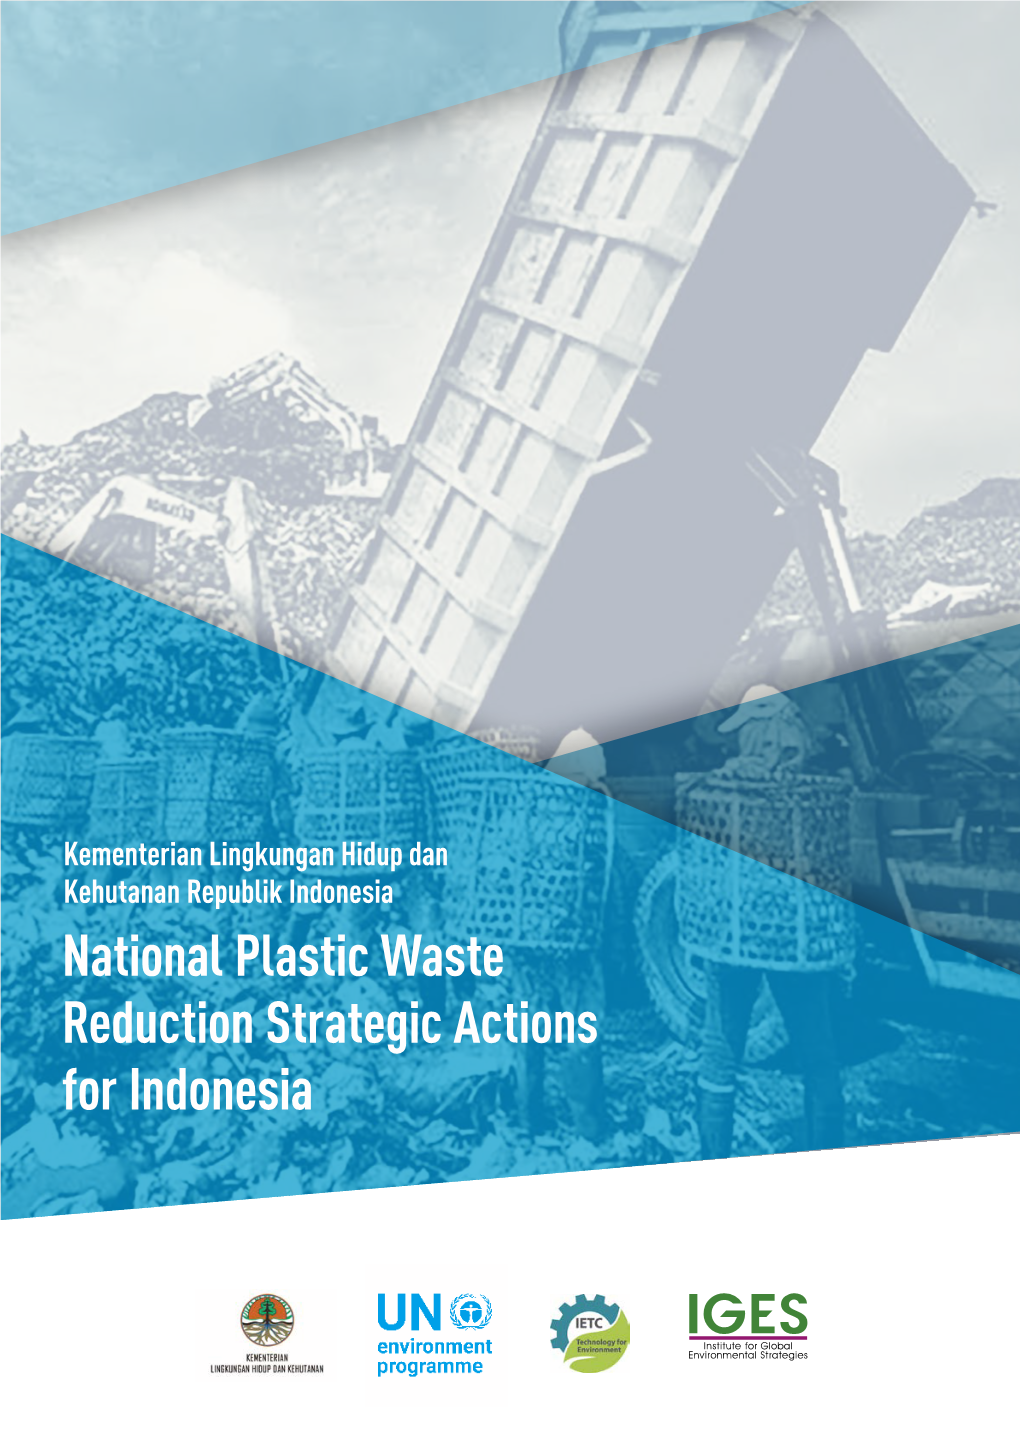 National Plastic Waste Reduction Strategic Actions for Indonesia